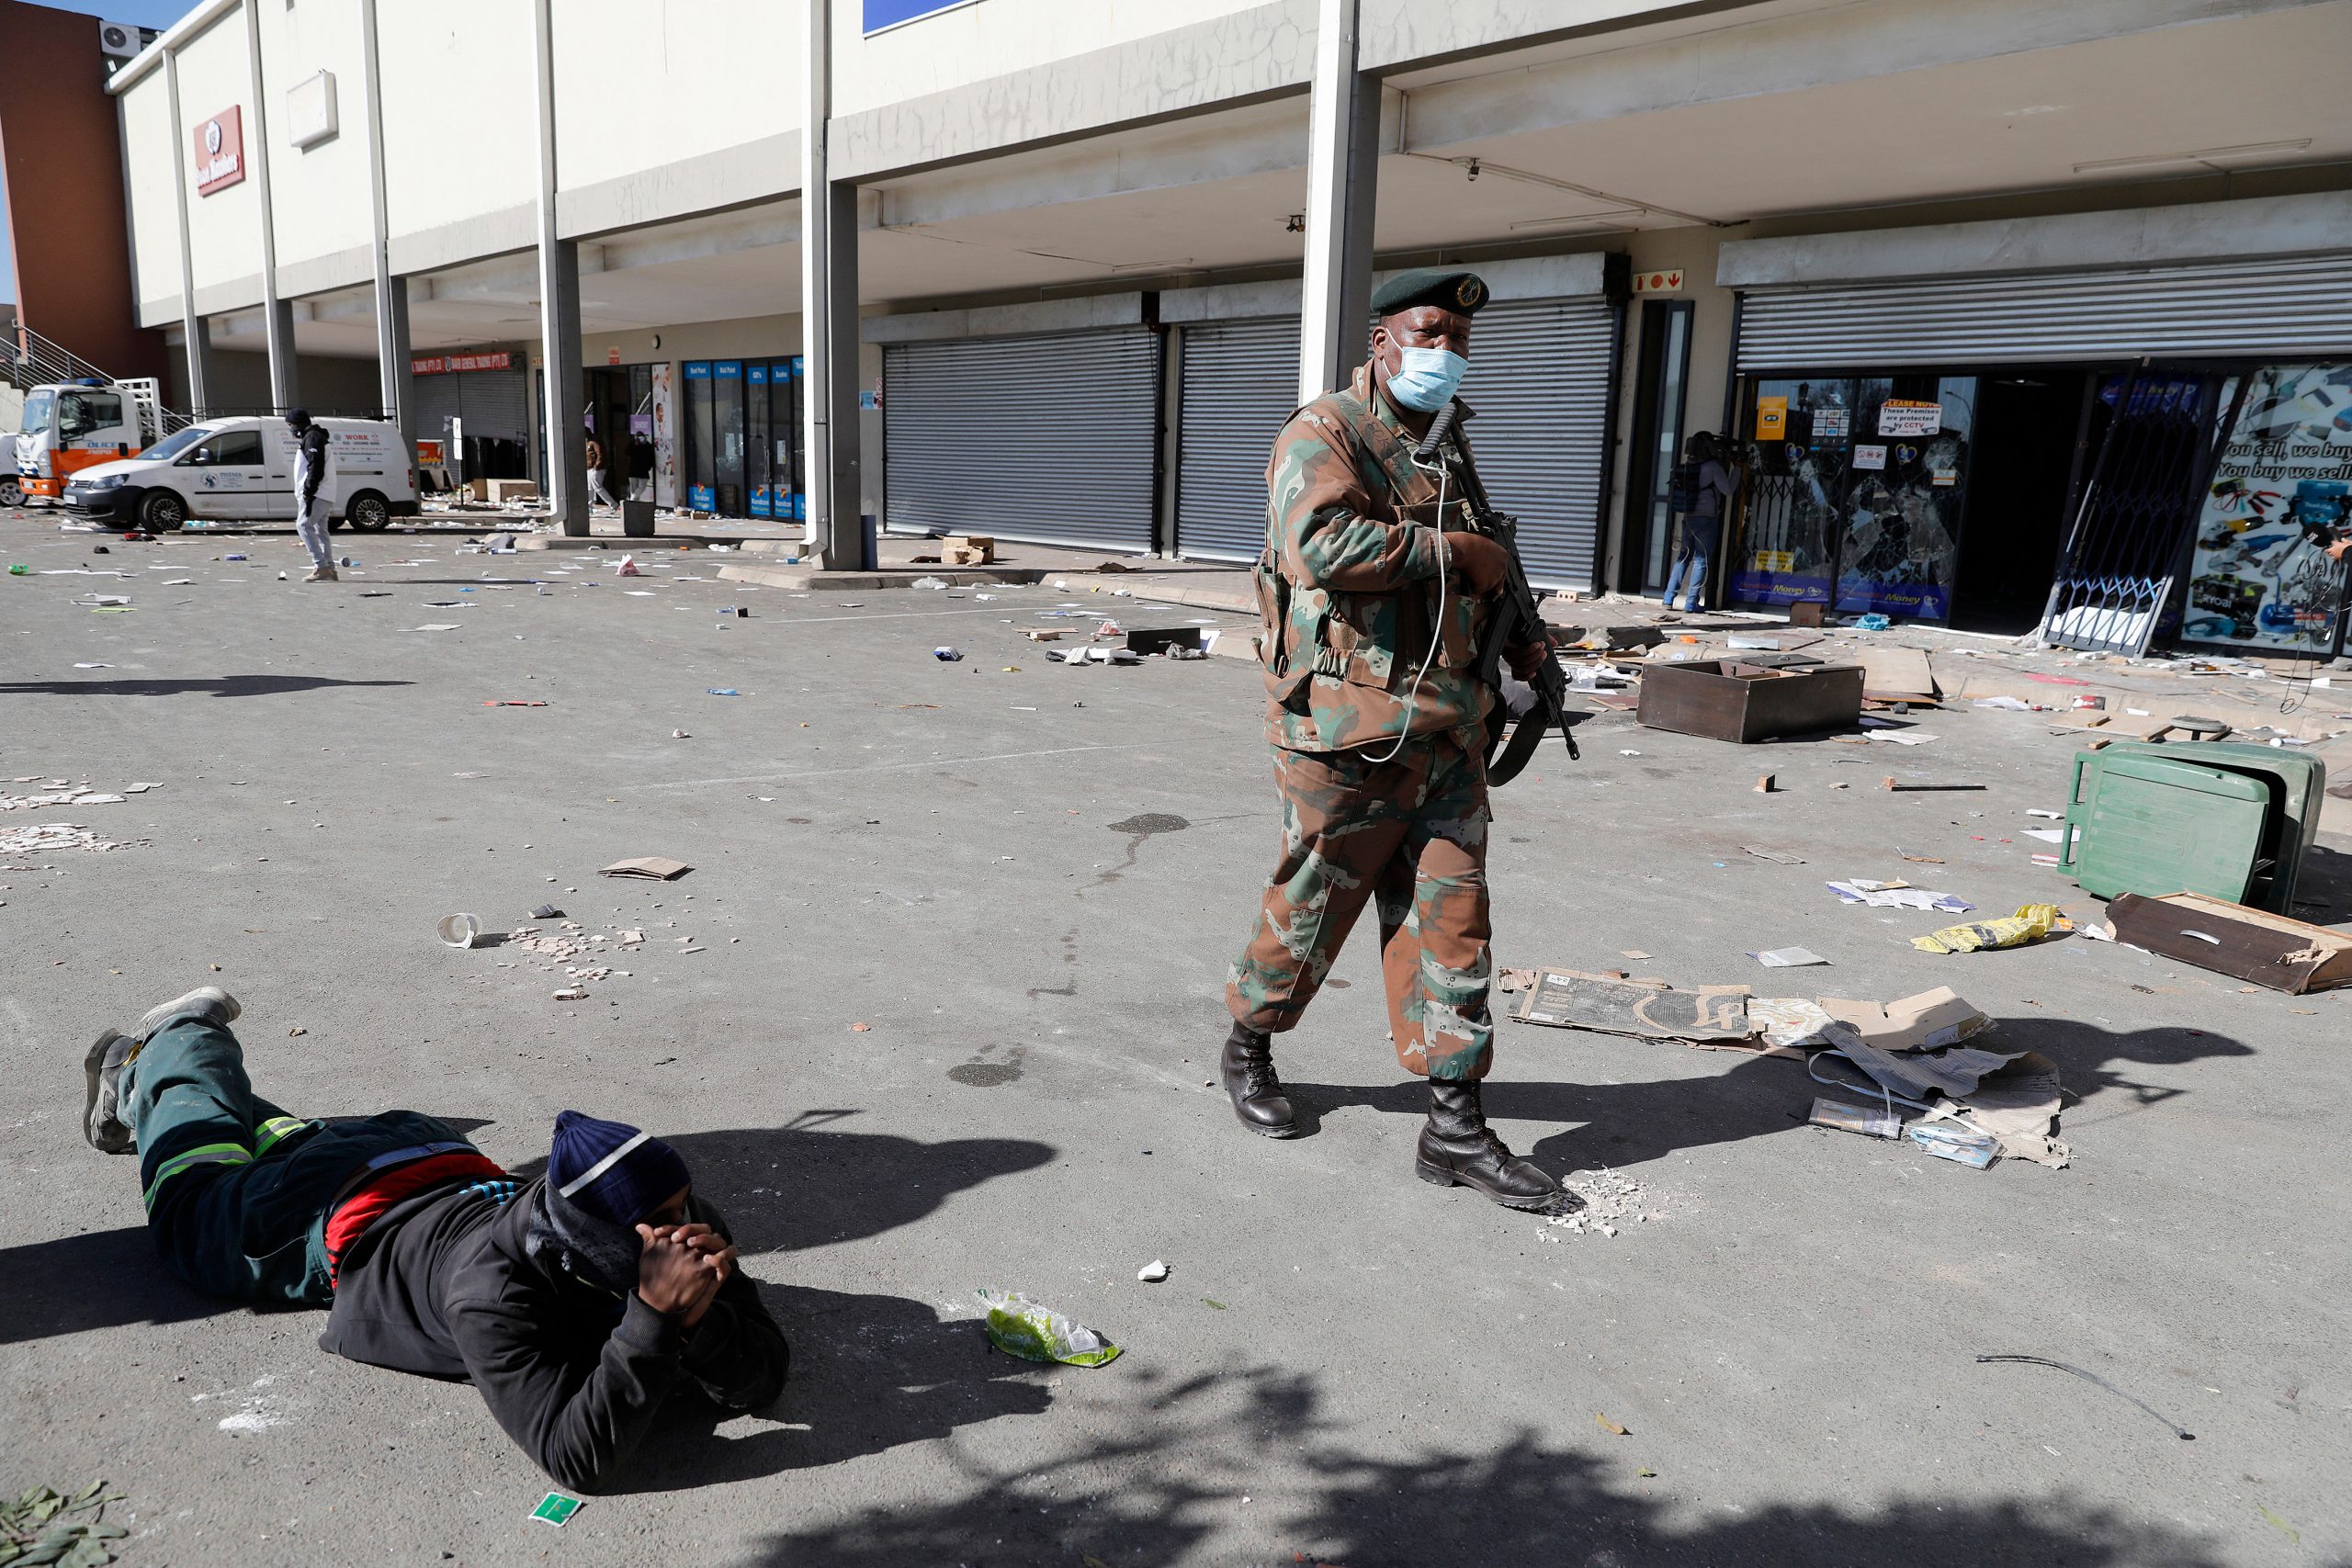 South Africa unrest death toll rises to 32